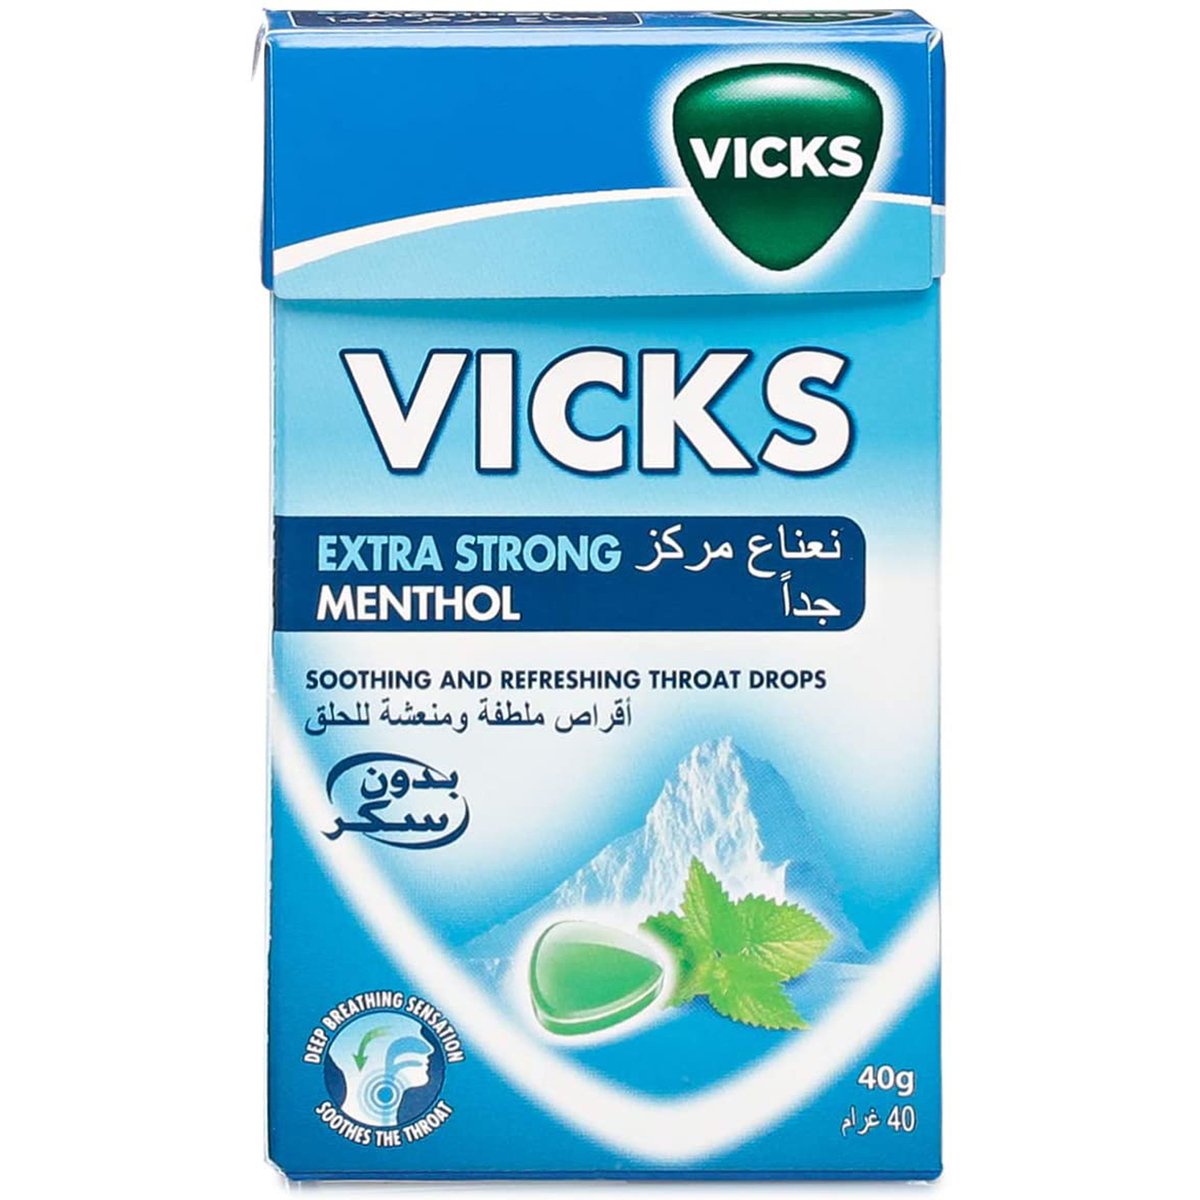 Vicks Extra Strong Menthol Soothing And Refreshing Throats Drops 40 g